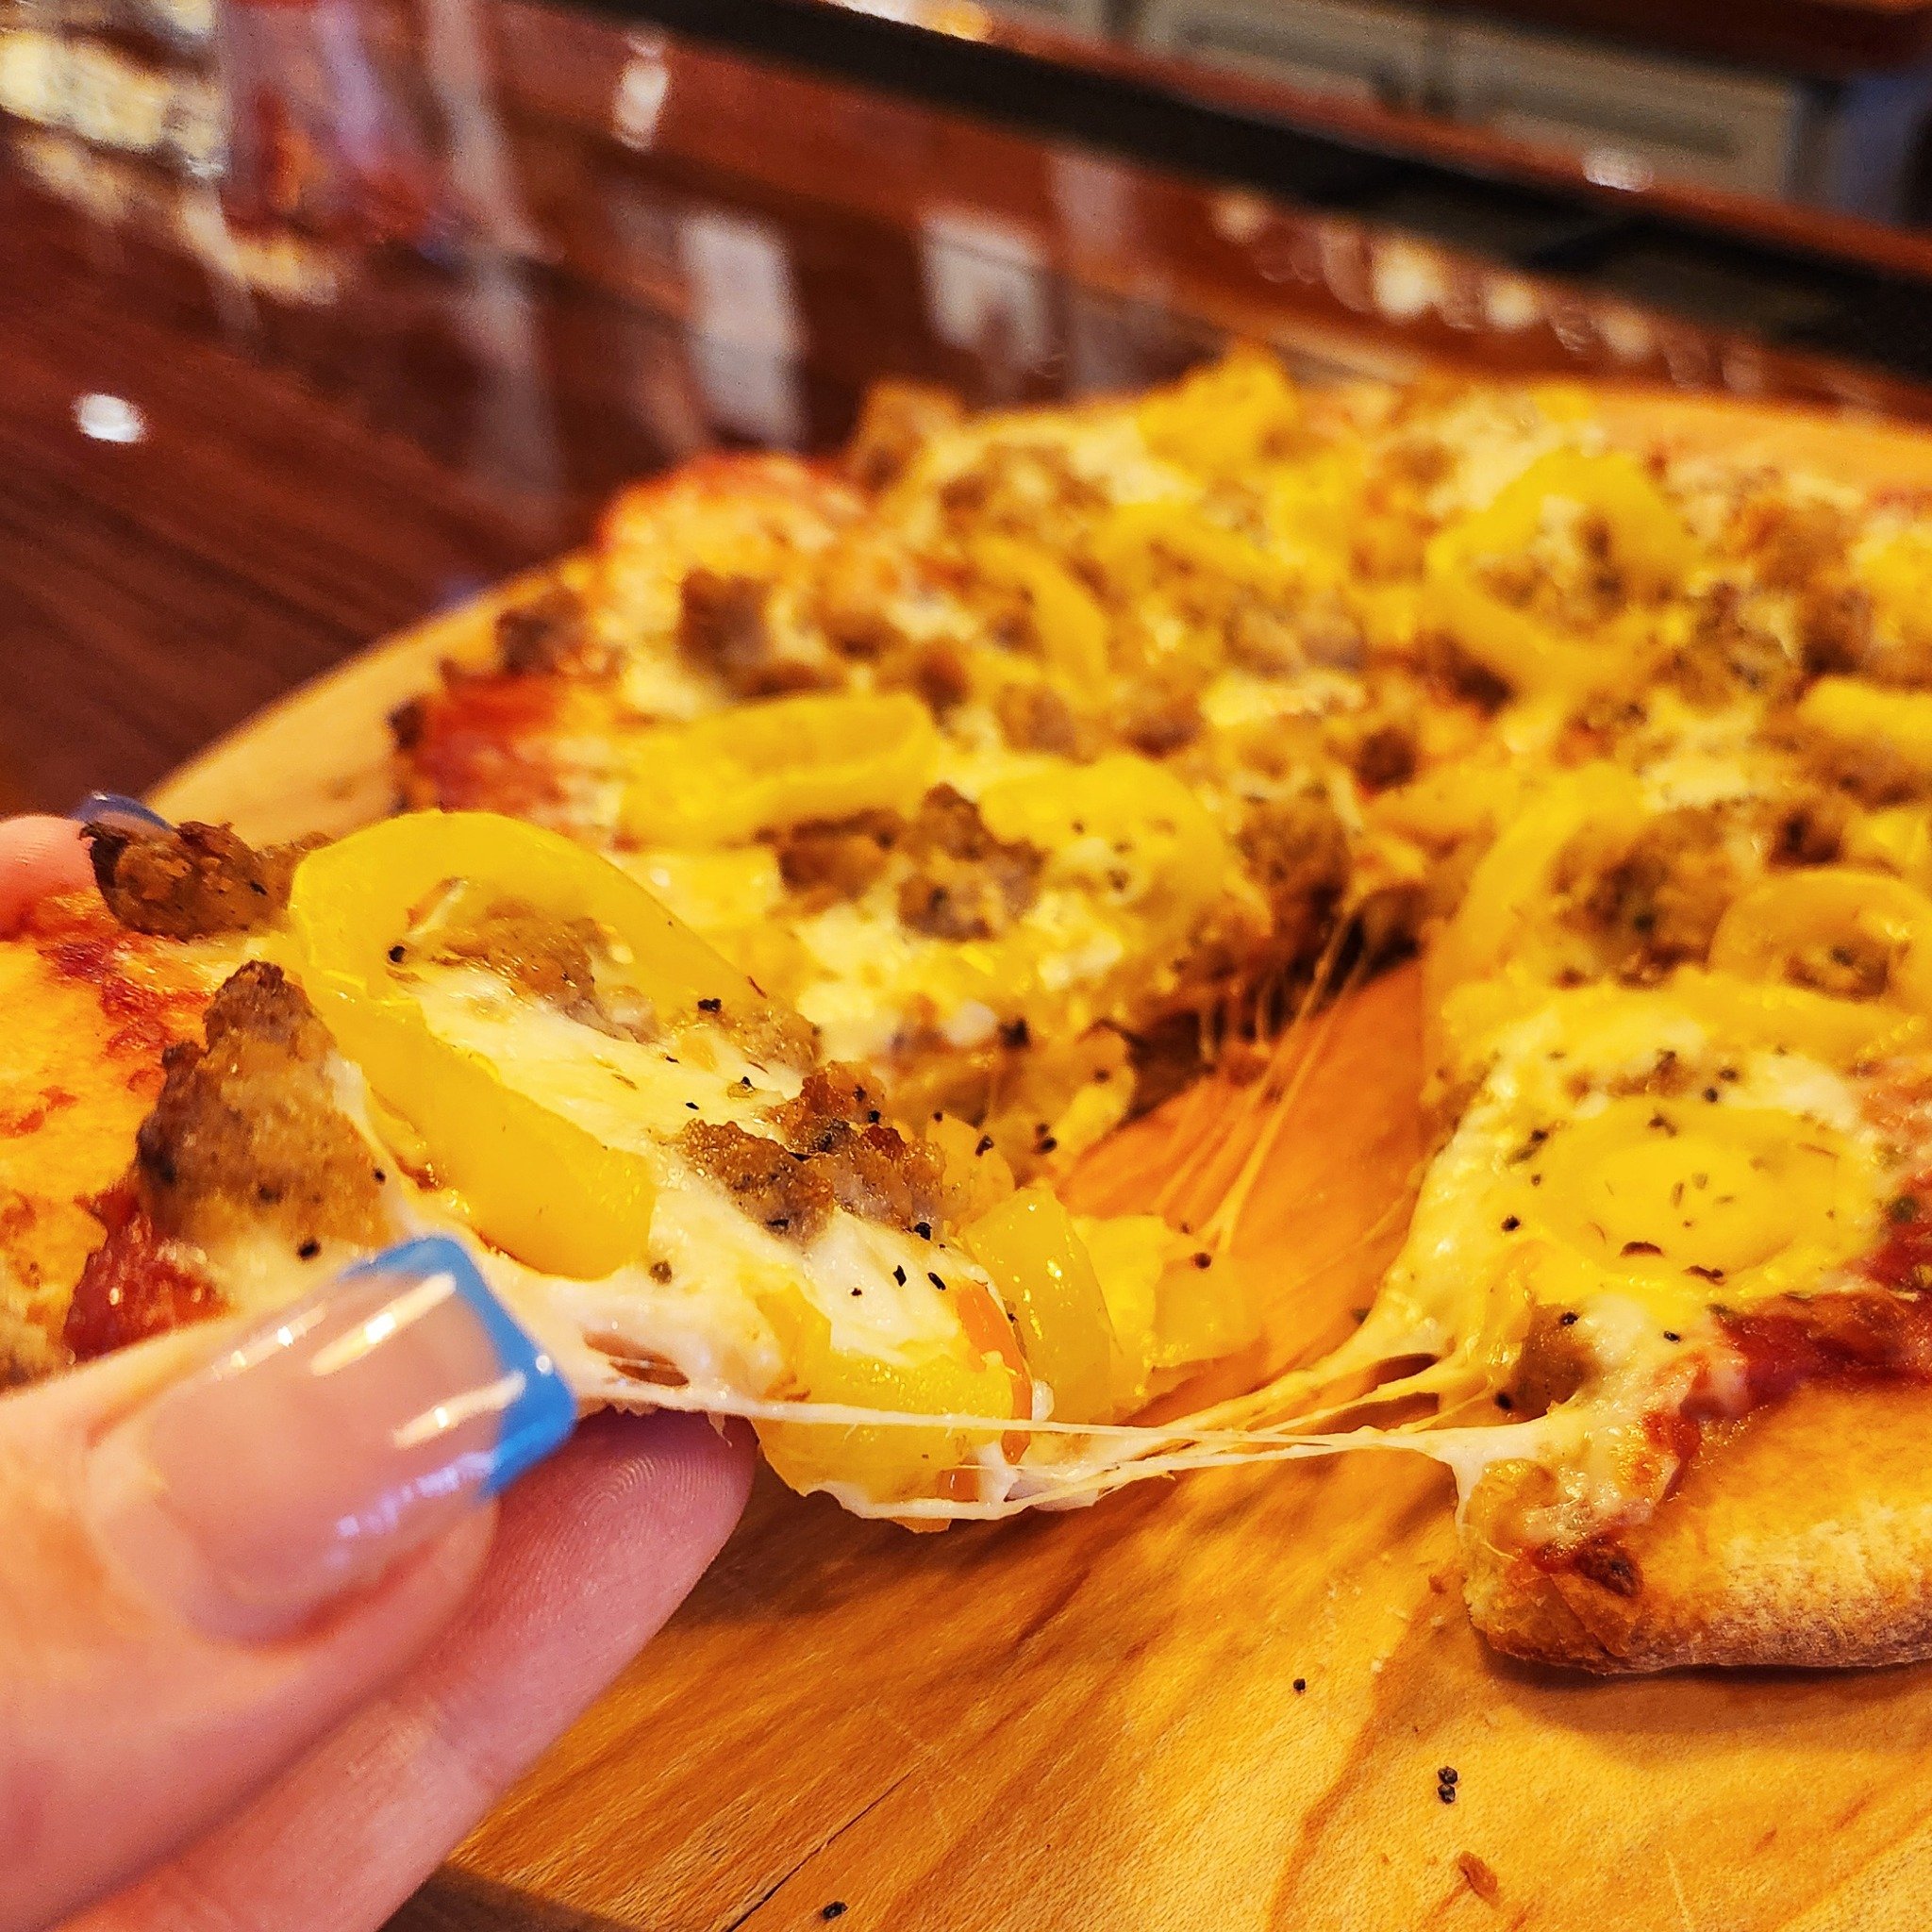 👀 Check out that cheese pull. 🍕 Did you know Heroes has great bites alongside great brews?  No need to meal plan tonight. Head on over and treat yourself. Open til 9P. #visitroc #iloveroc